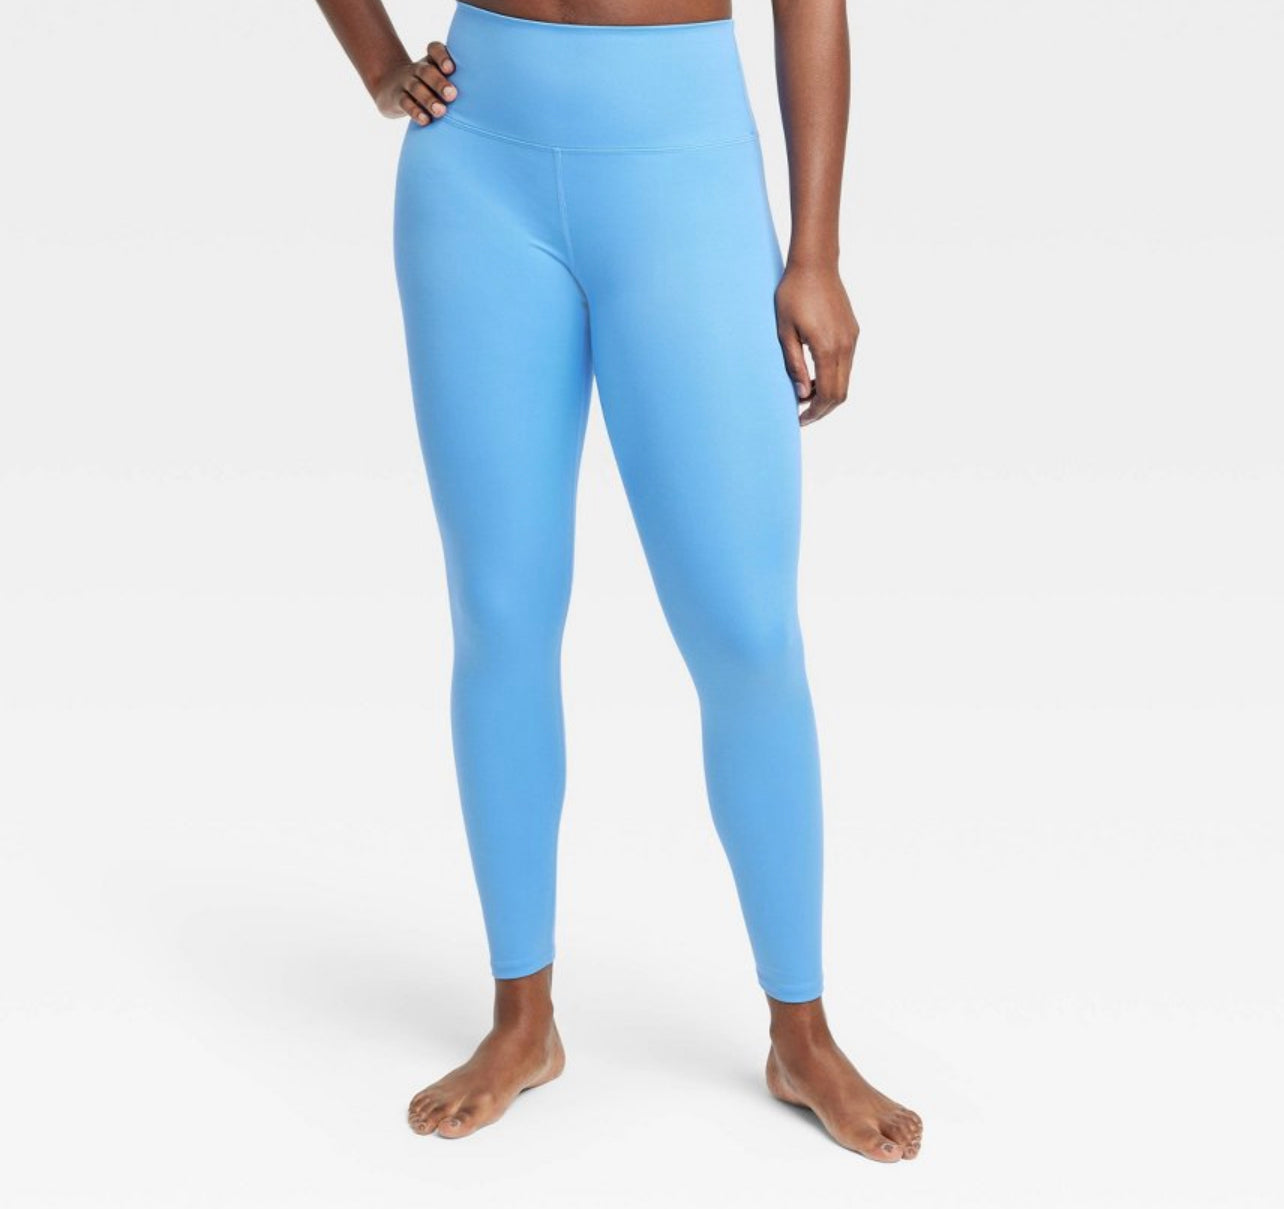 Women's Brushed Sculpt Curvy High-rise Leggings - All In Motion